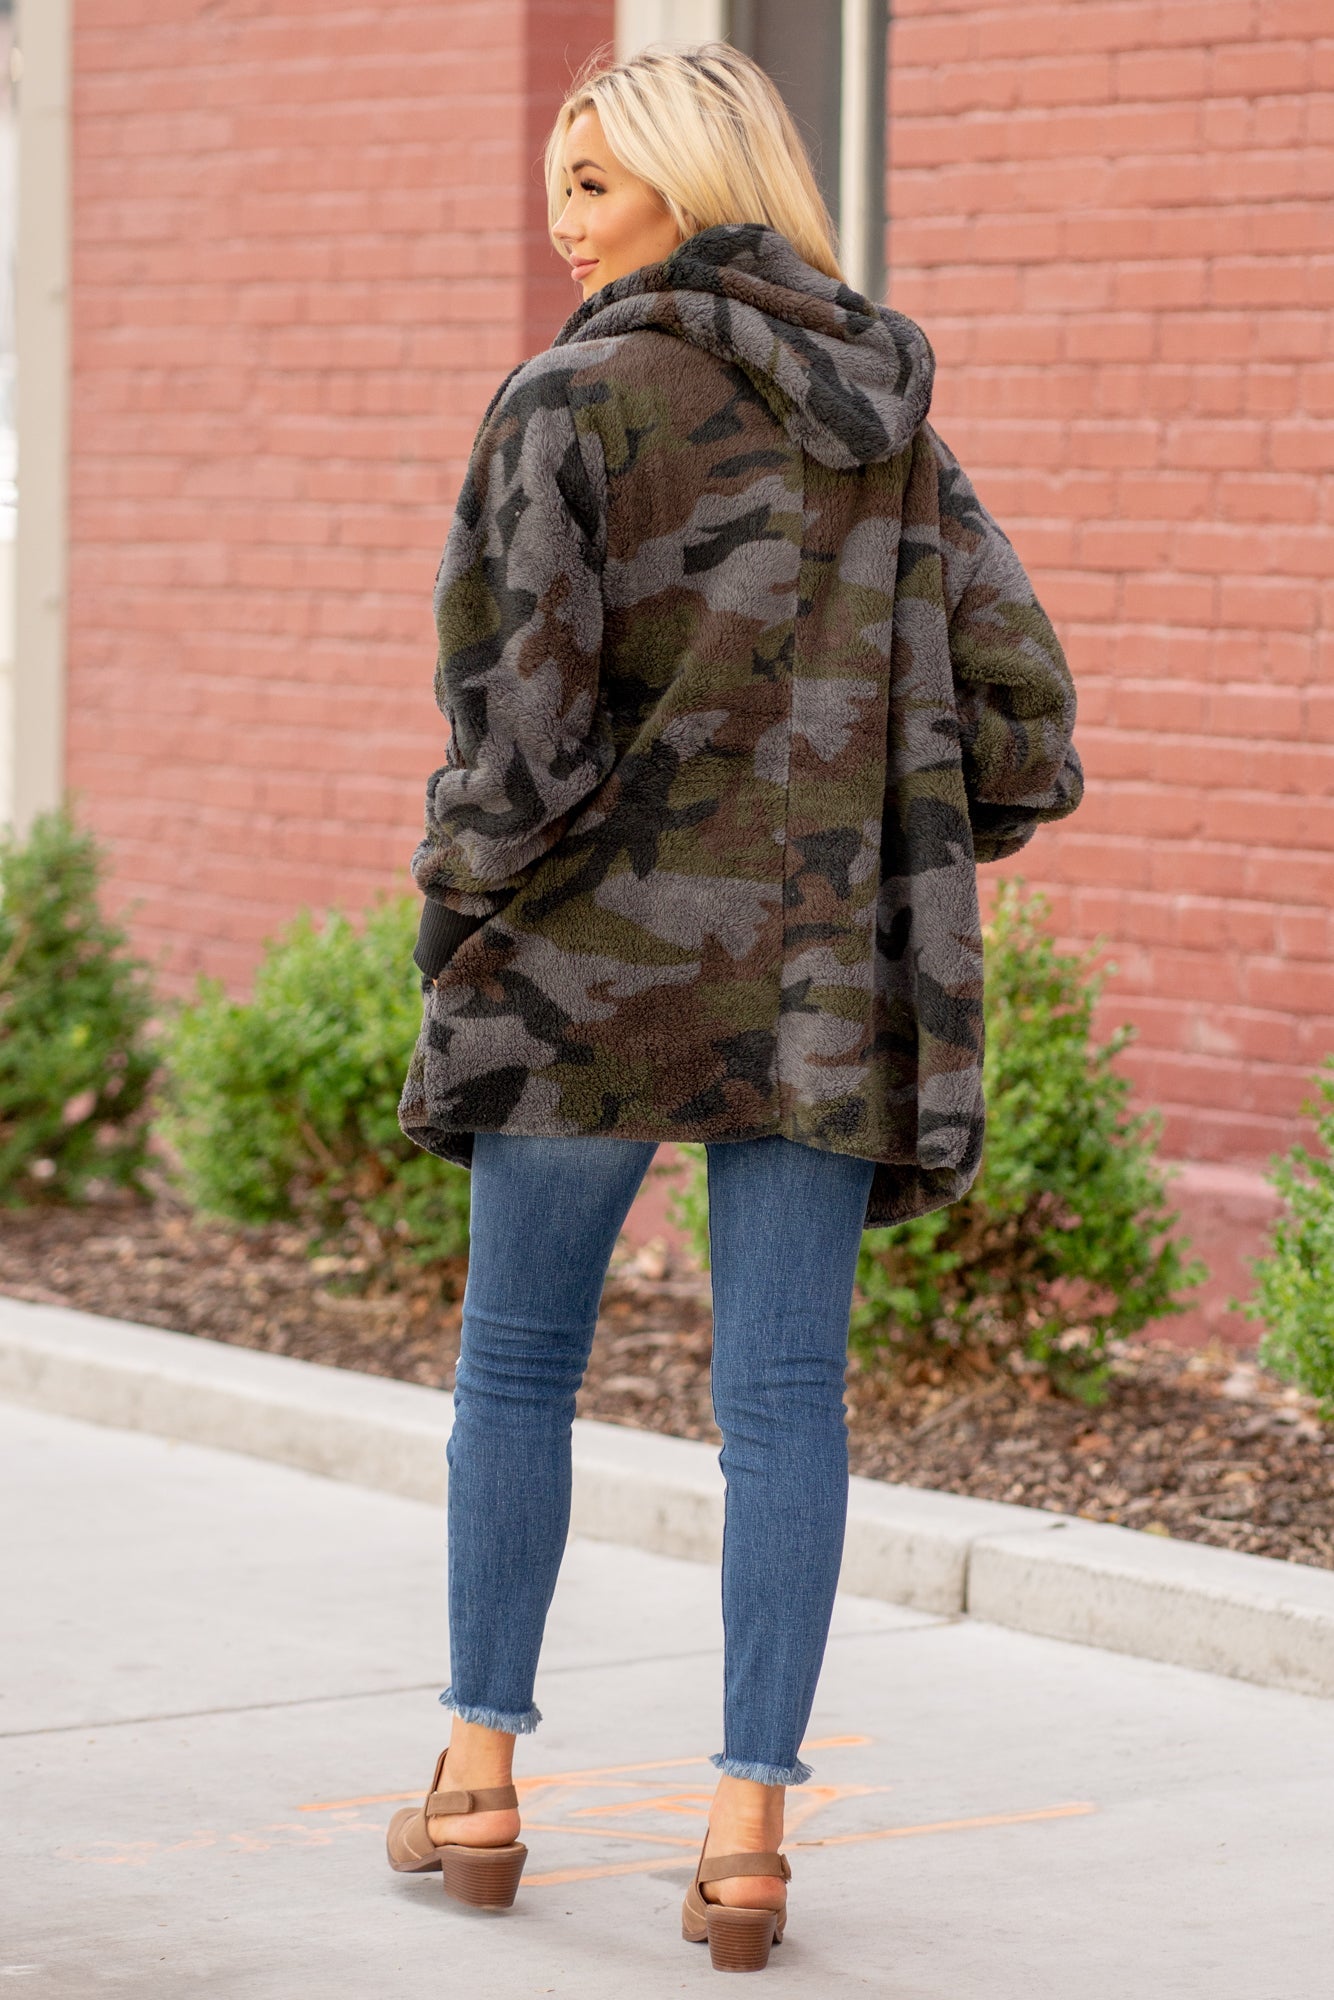 Hem & Thread   This camo print is too cute. Pair with a great boyfriend denim in heels for a trendy fun look.  Collection: Winter 2020 Color: Camouflage  Neckline: Open  Sleeve: Long 100% POLYESTER Style #: 8433F-Camo Contact us for any additional measurements or sizing.